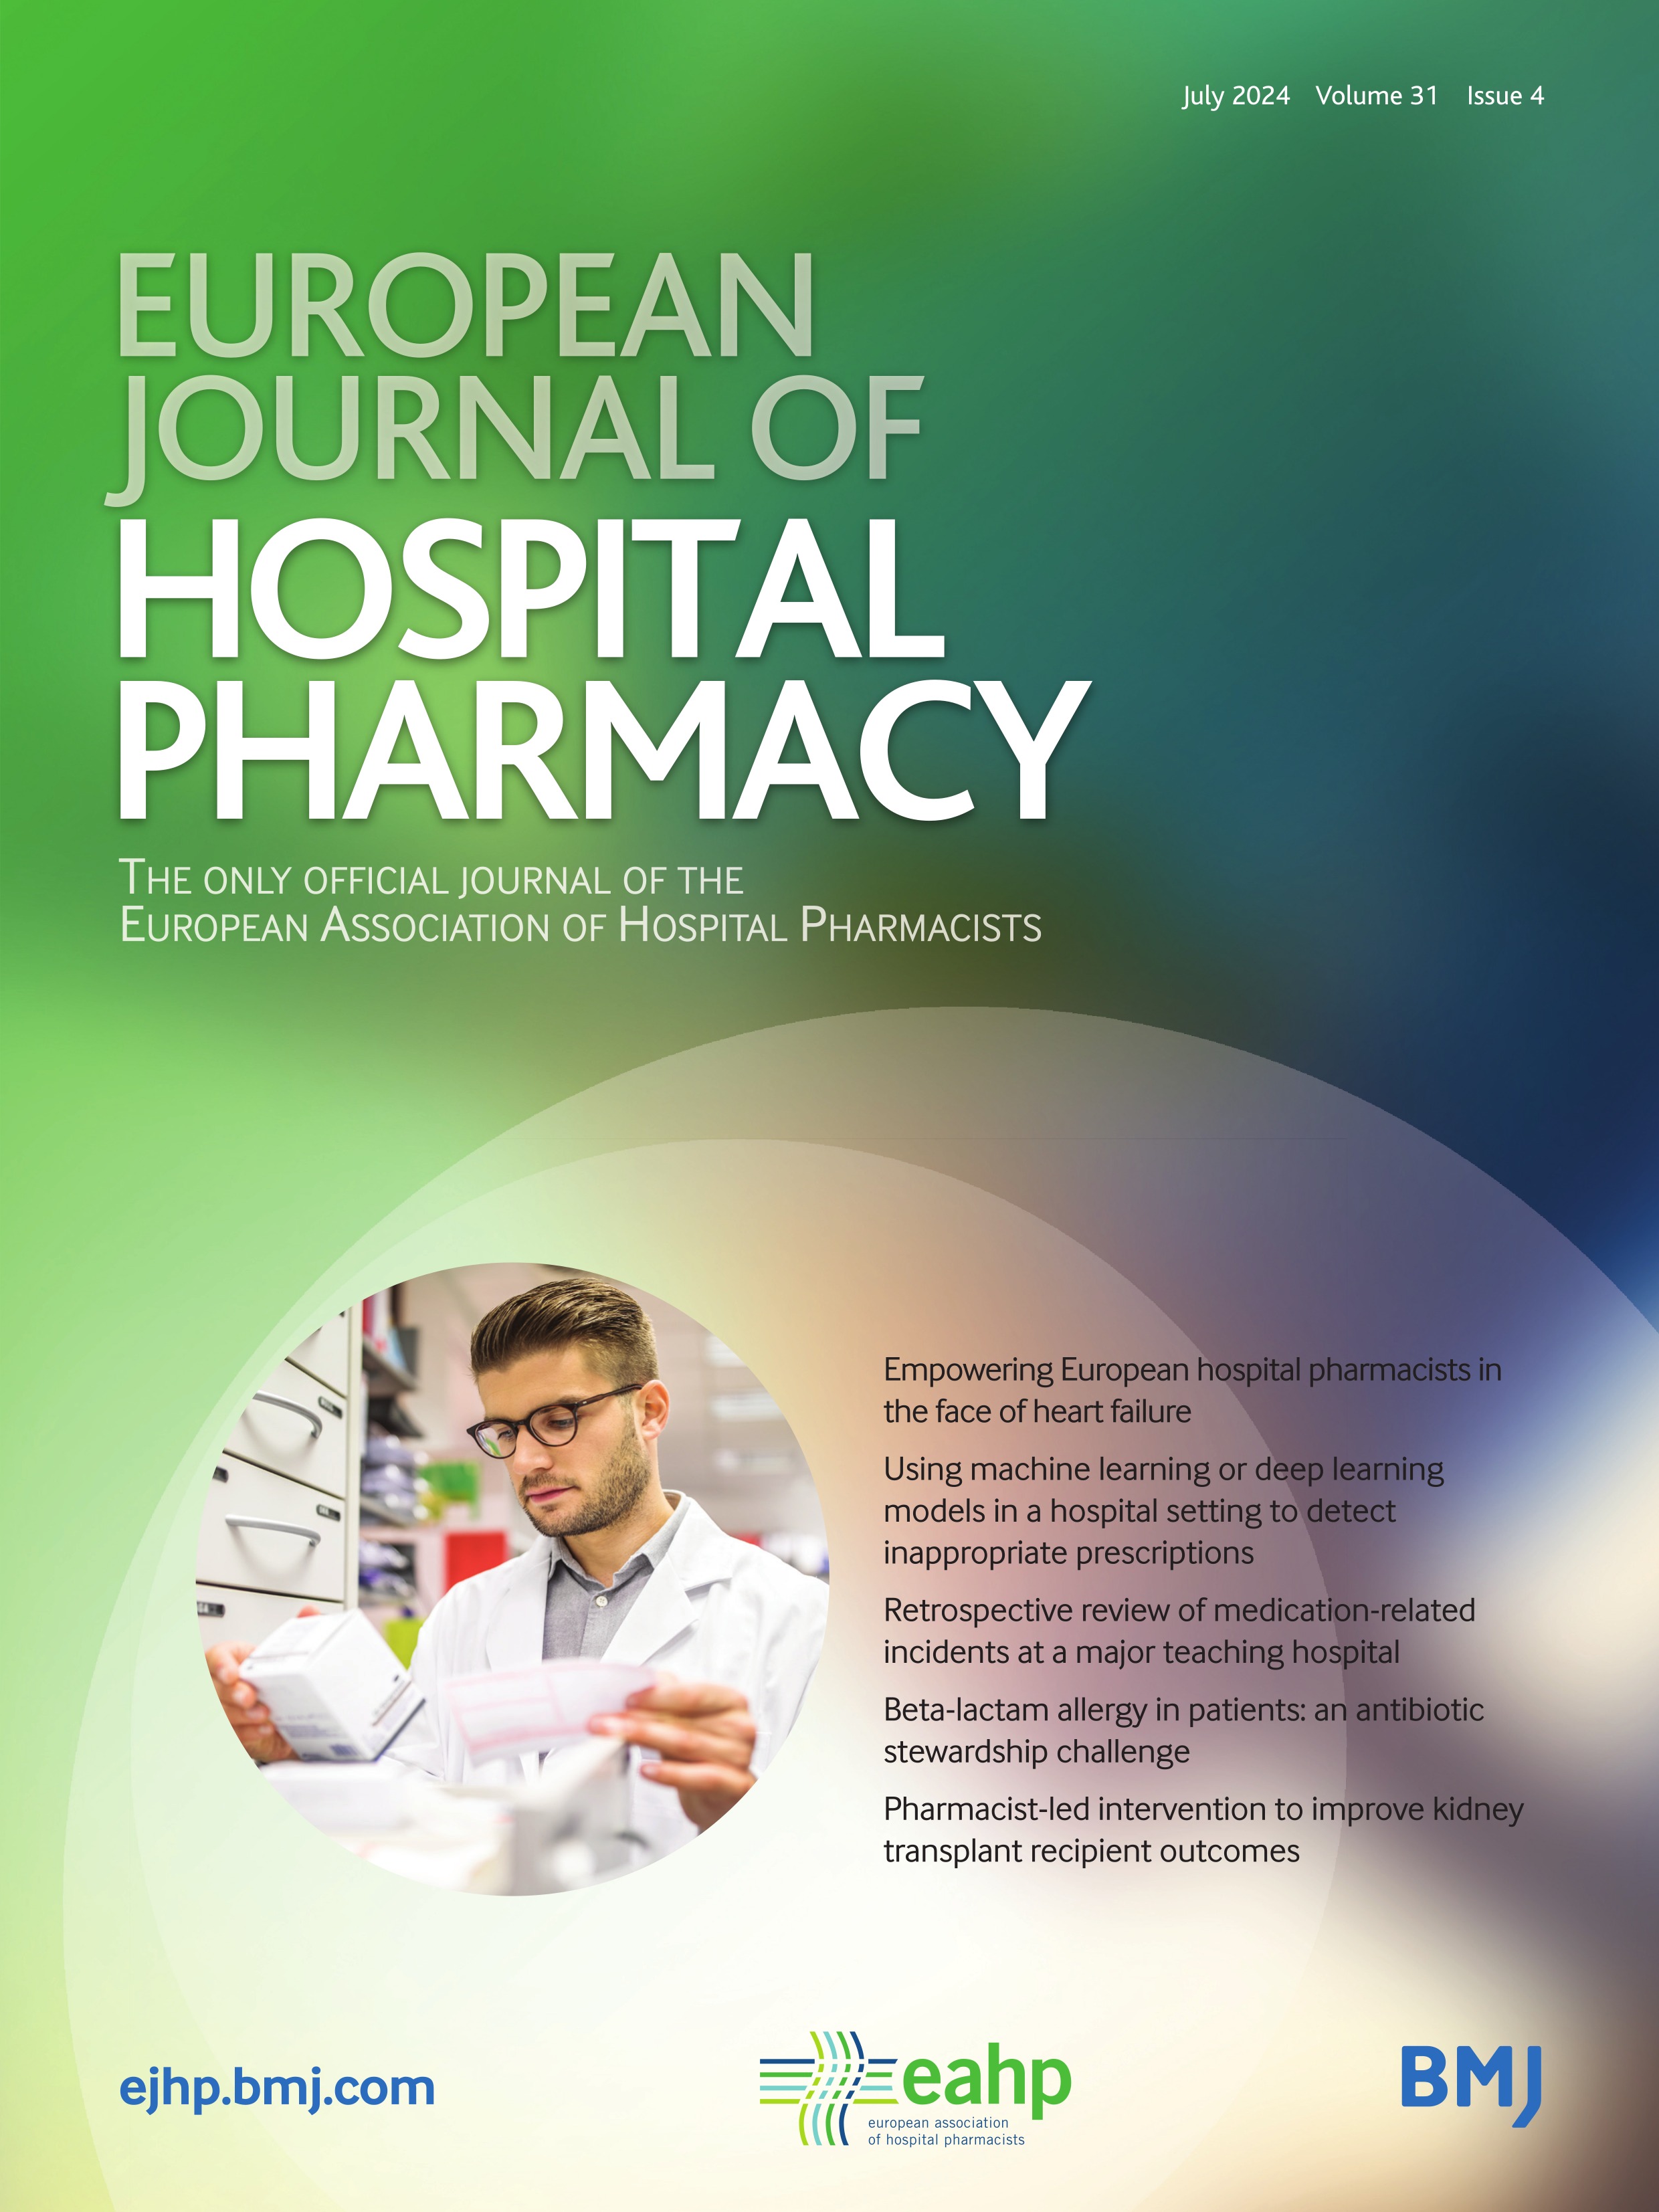 Empowering European hospital pharmacists in the face of heart failure